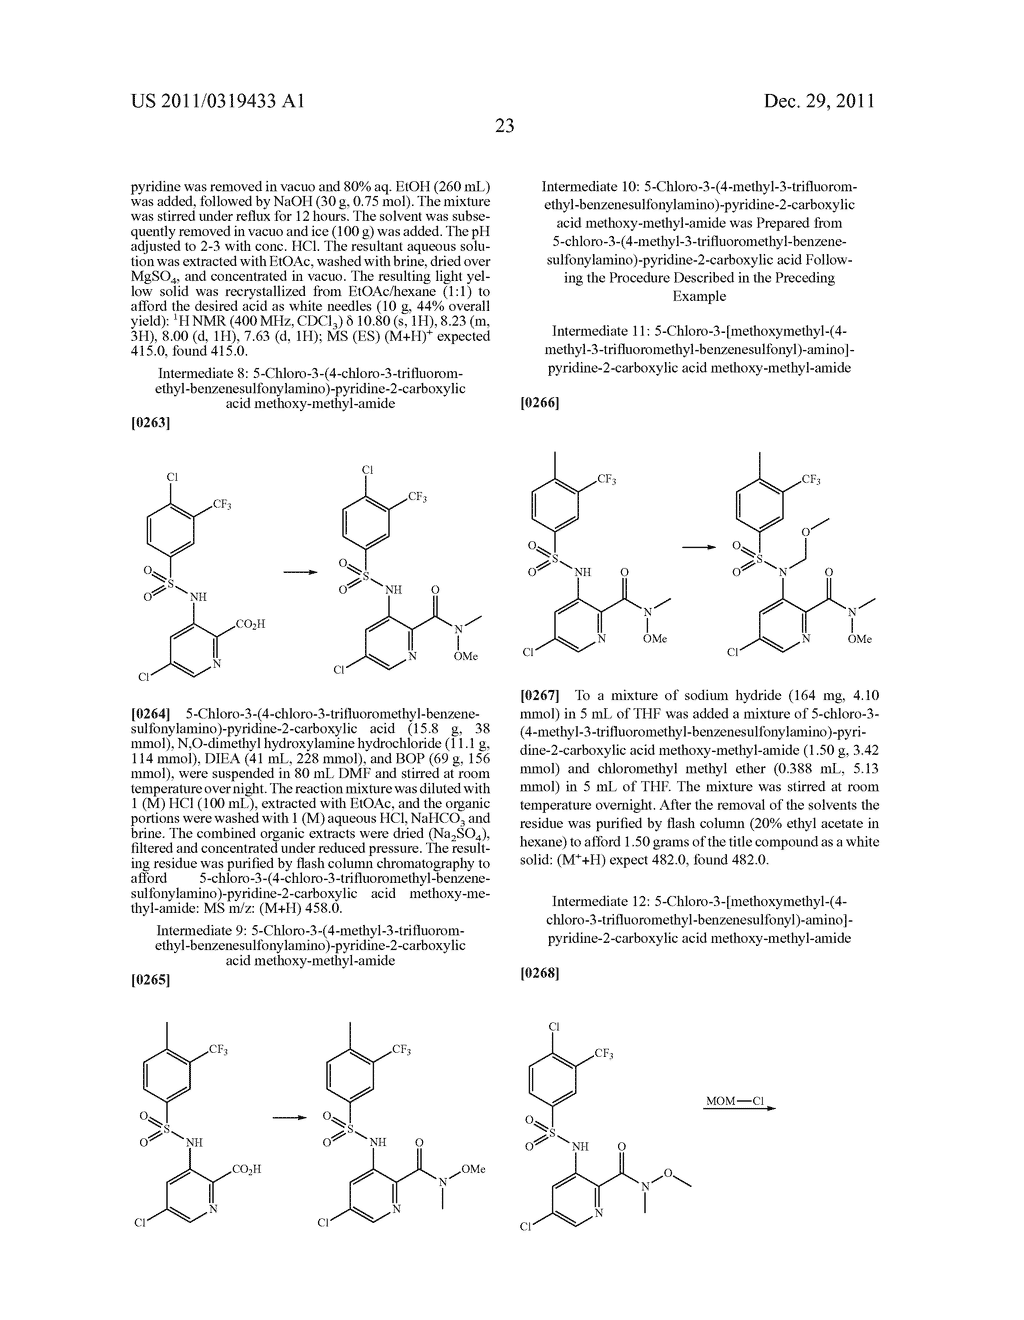 FUSED HETEROARYL PYRIDYL AND PHENYL BENZENESUFLONAMIDES AS CCR2 MODULATORS     FOR THE TREATMENT OF INFLAMMATION - diagram, schematic, and image 25